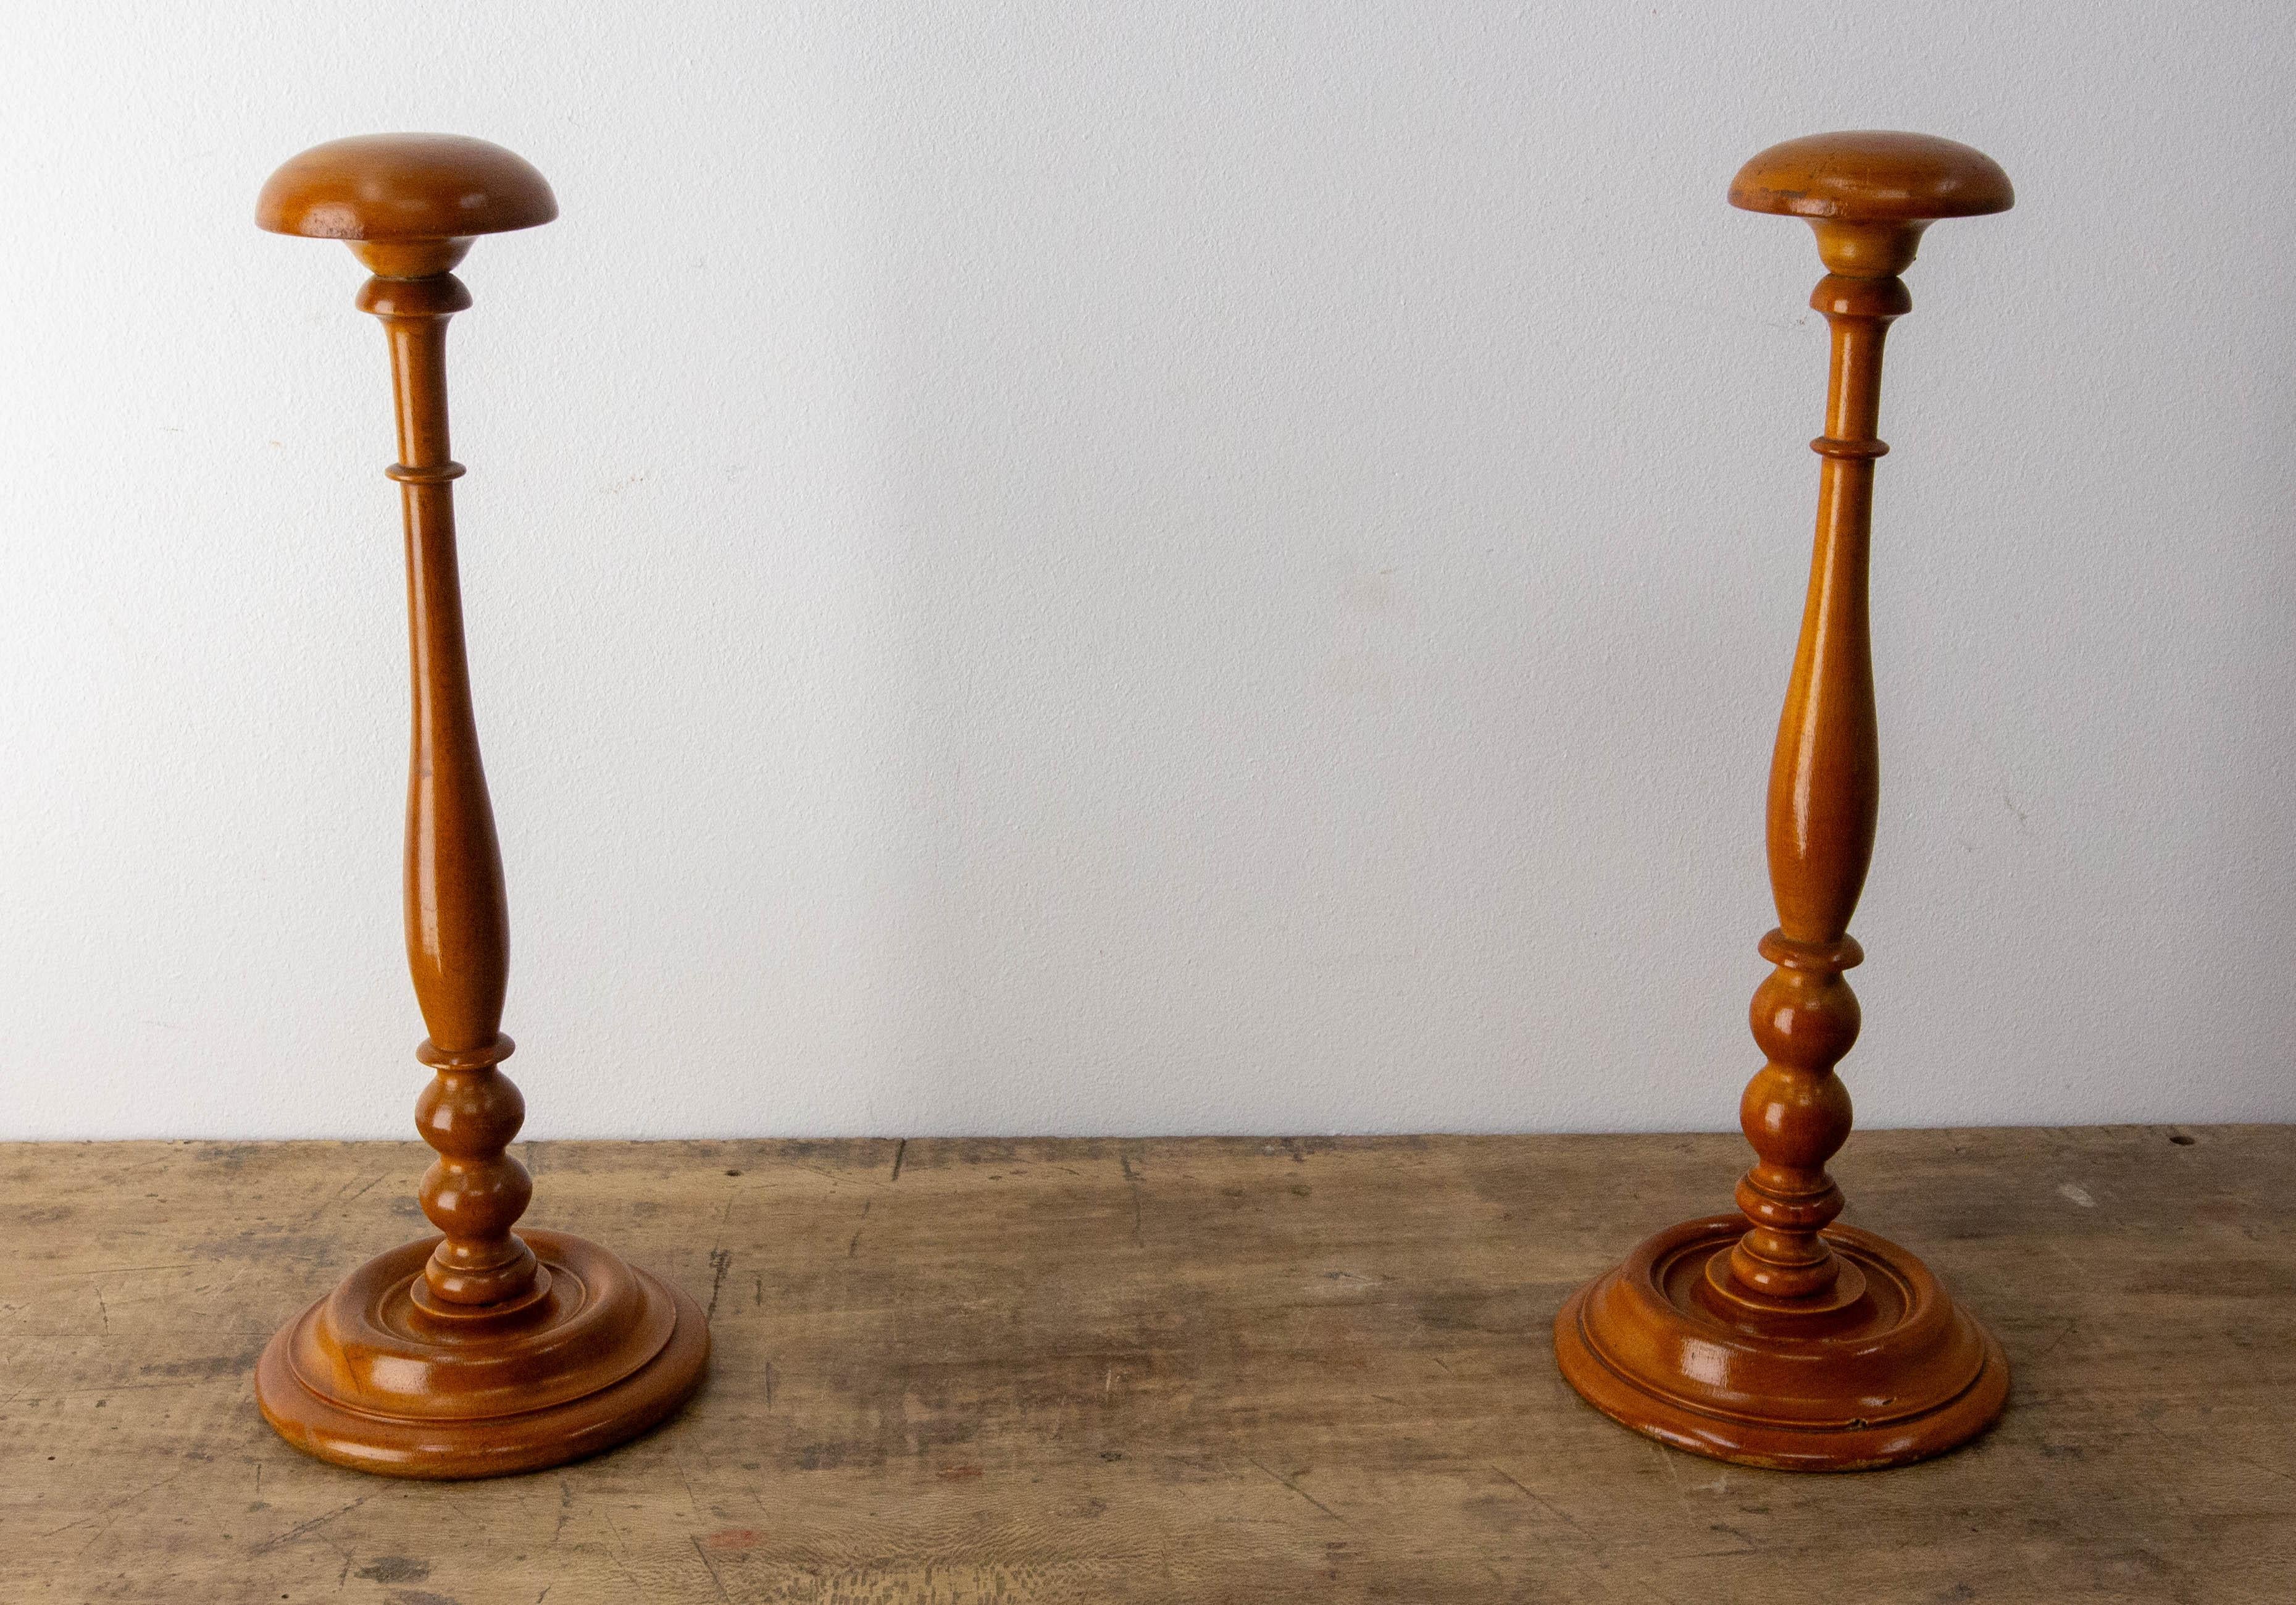 French early 20th century pair of hat racks or hat holders
Turned beech
This type of furniture was placed on a commode, a console or a side table, to to welcome visitors and allow them to put their hats down. 
Good condition

Shipping : 11 / 20 / 31